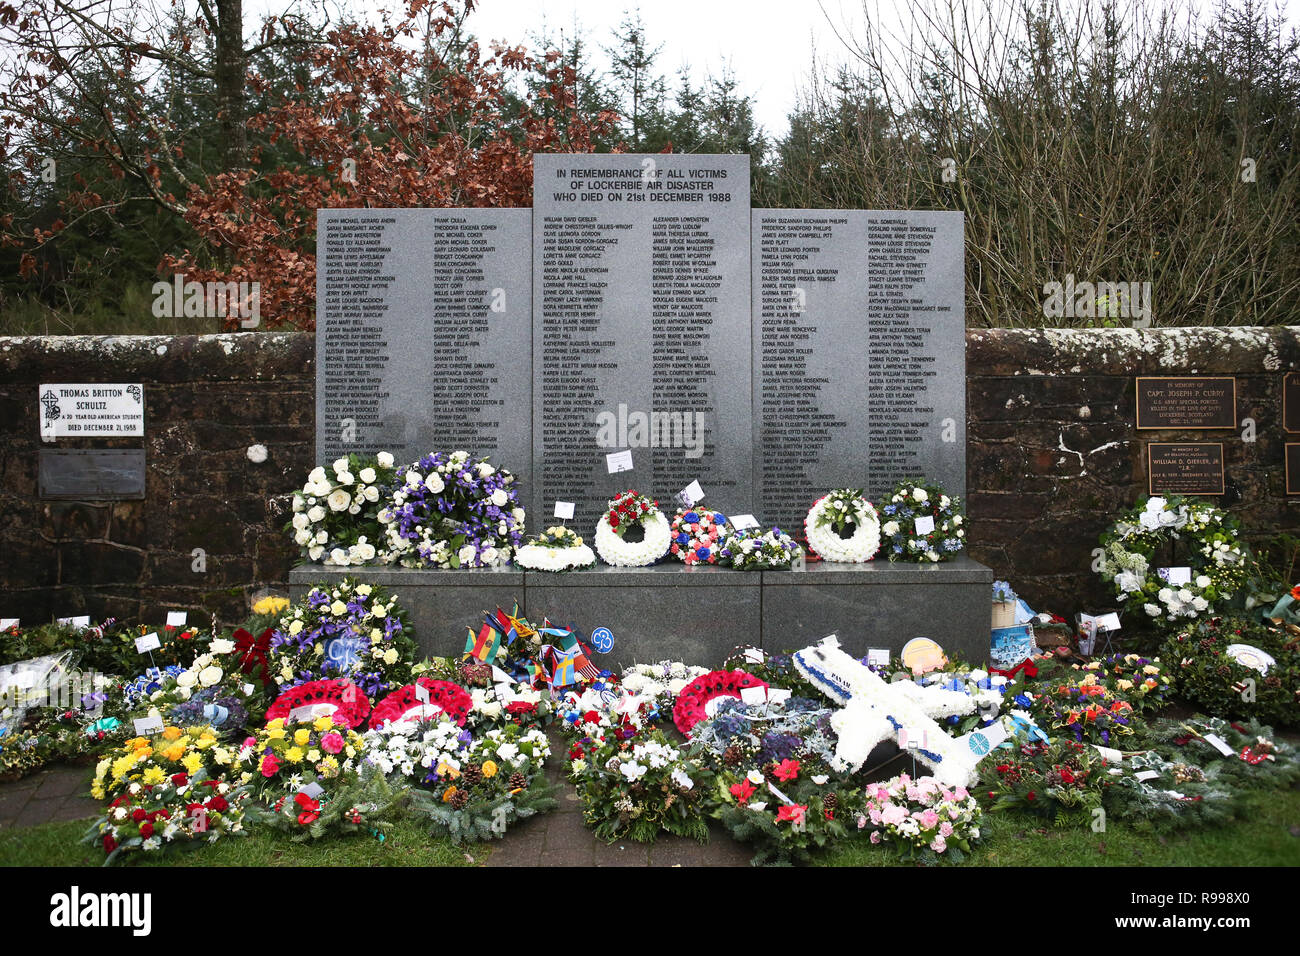 Wreaths and floral tributes left during the commemoration service in the Memorial Garden at Dryfesdale Cemetery in Lockerbie to mark the 30th anniversary of the Lockerbie bombing. Stock Photo